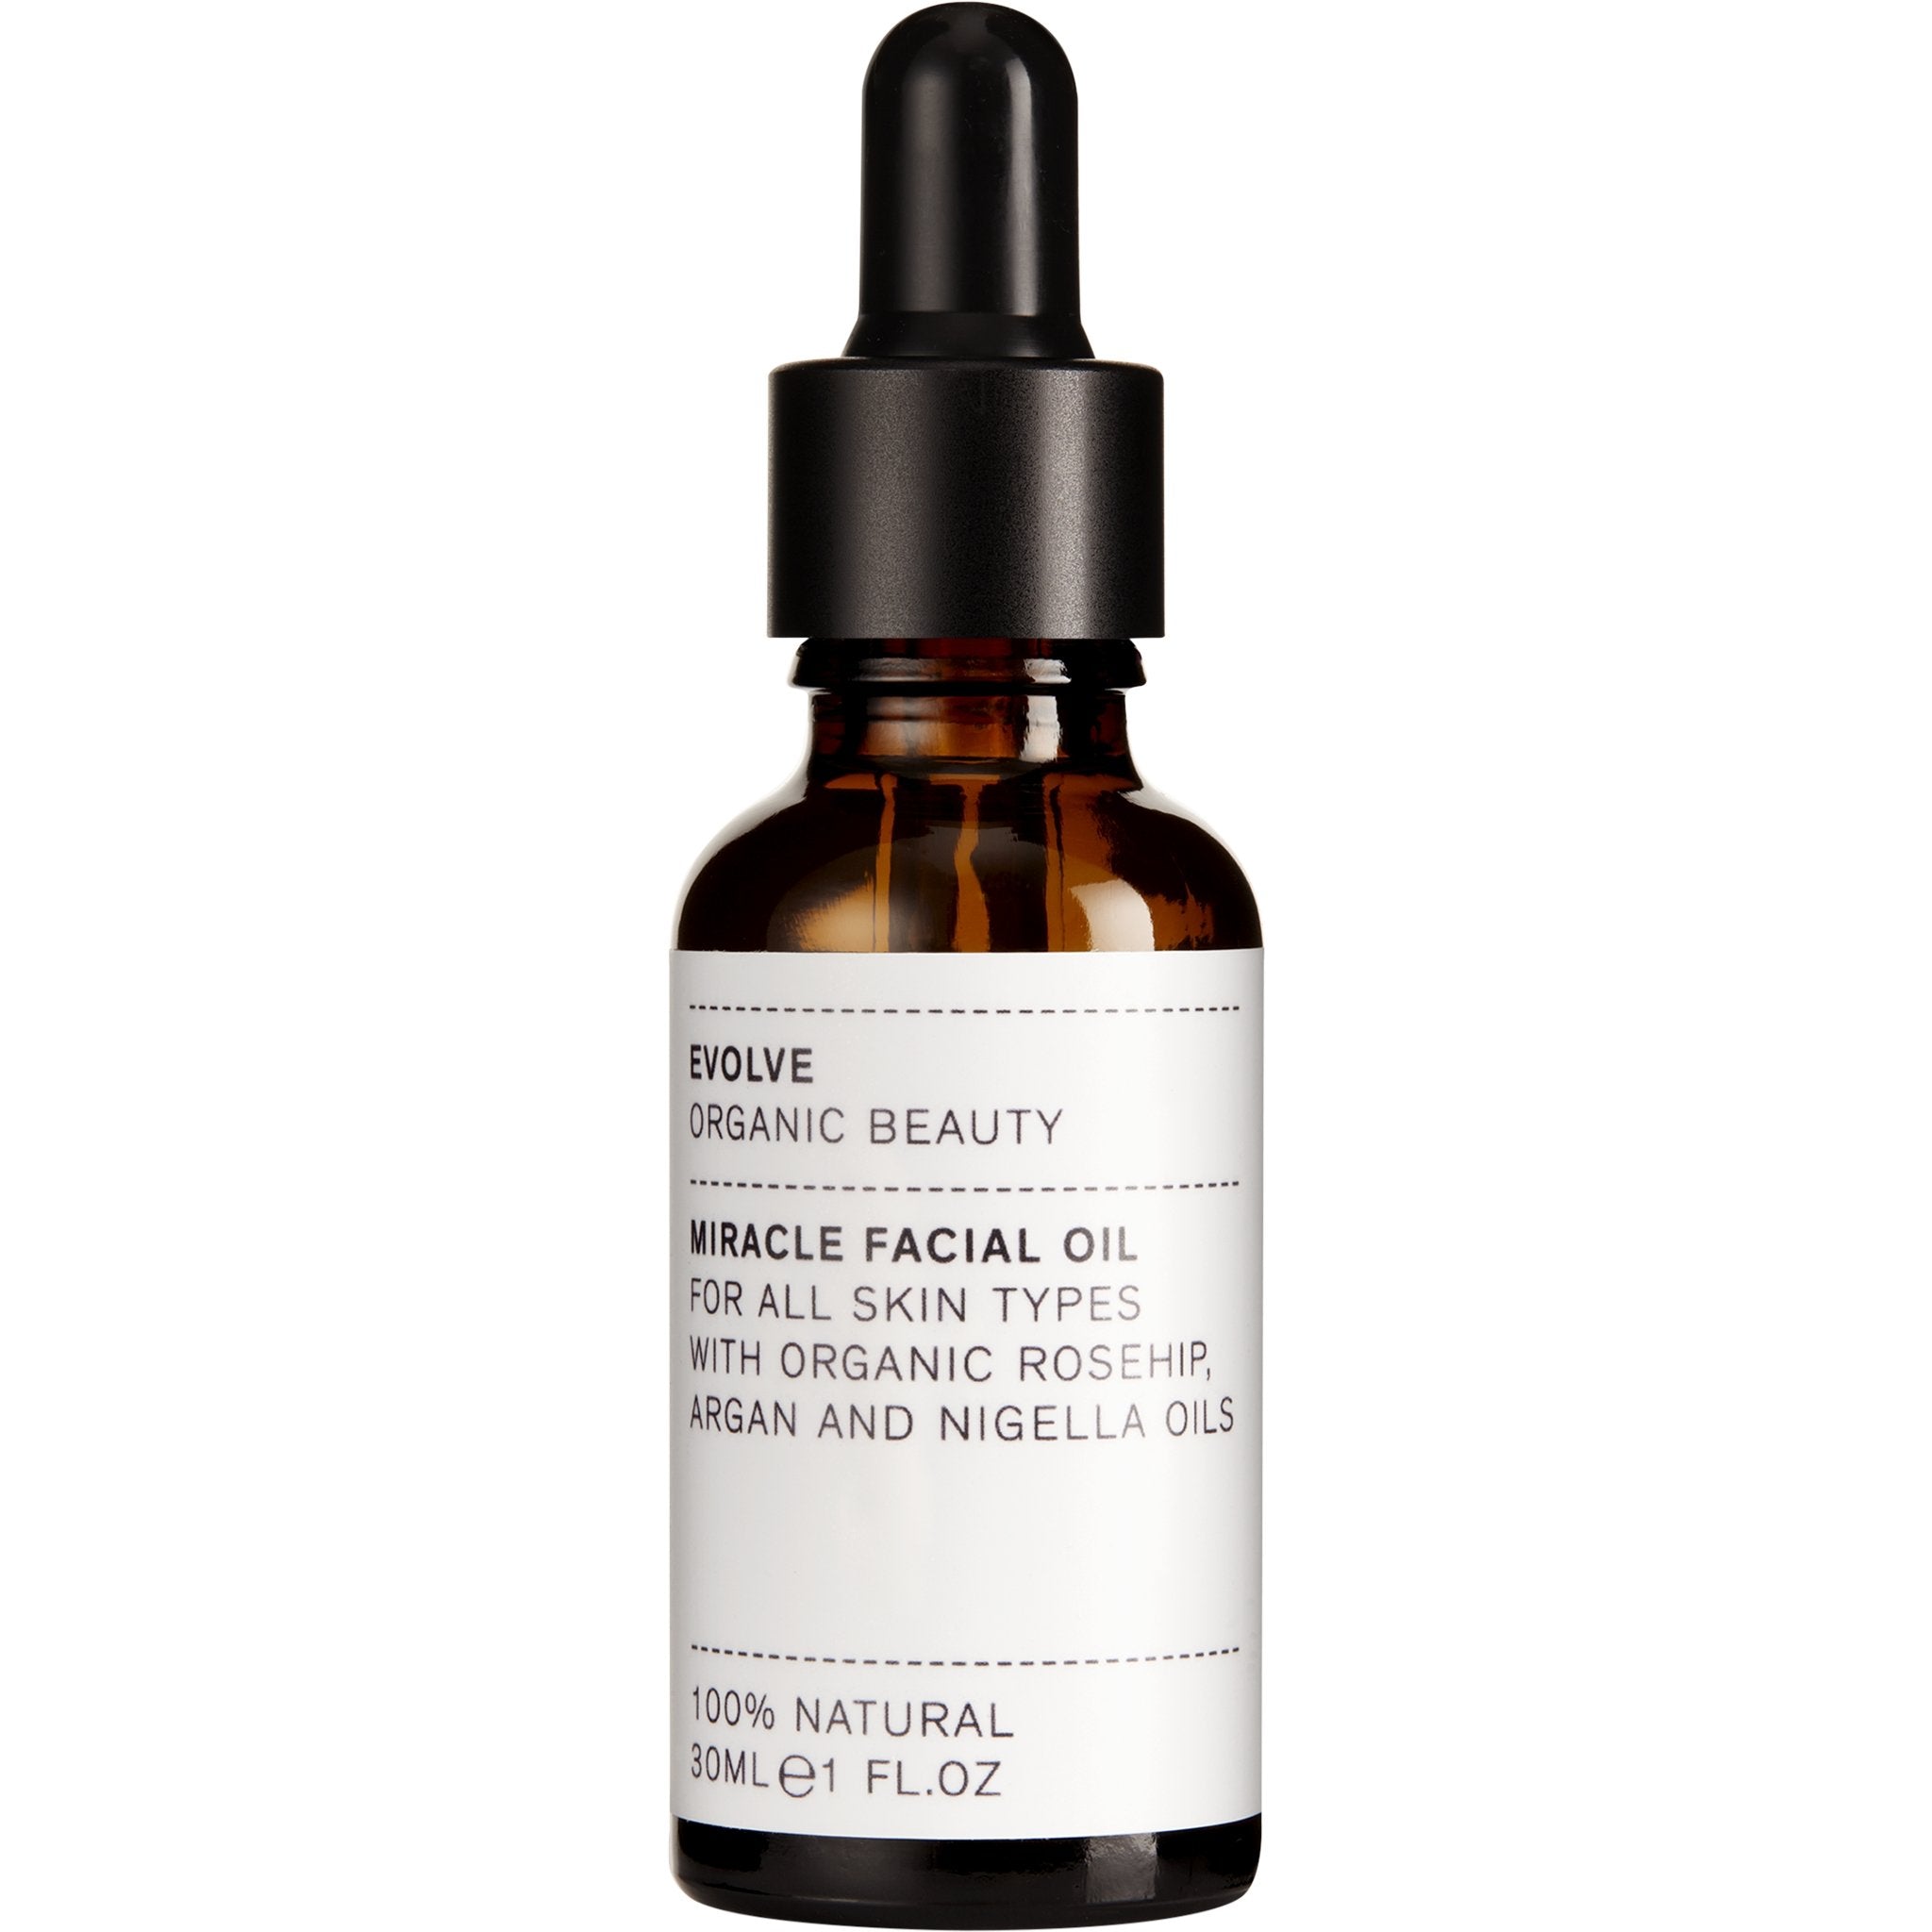 Miracle Facial Oil - mypure.co.uk